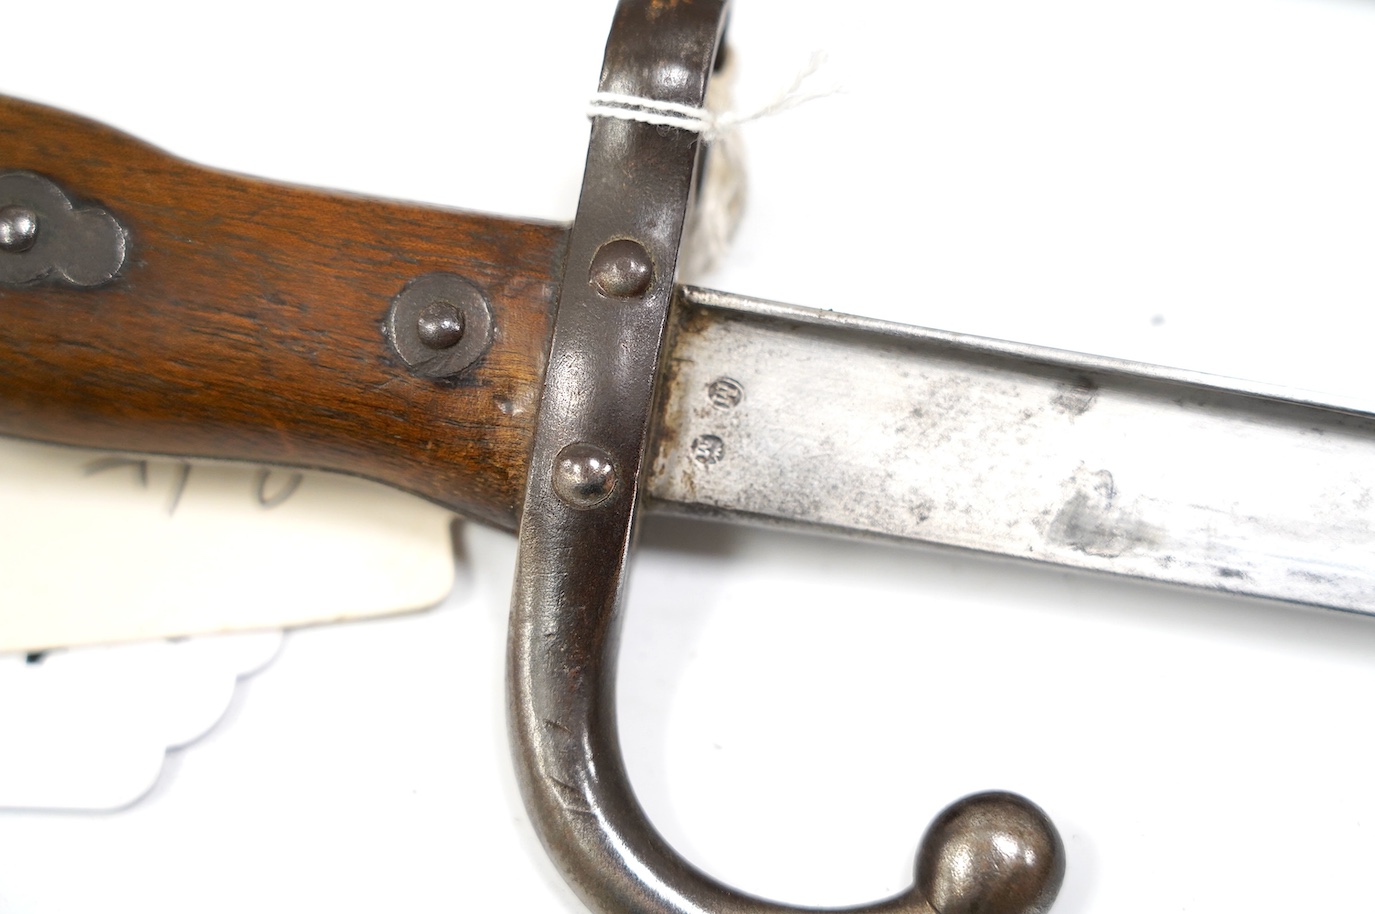 An 1875 French T-section bayonet in its steel scabbard for a Gras rifle, with engraving in French to the top of the blade. Condition - good